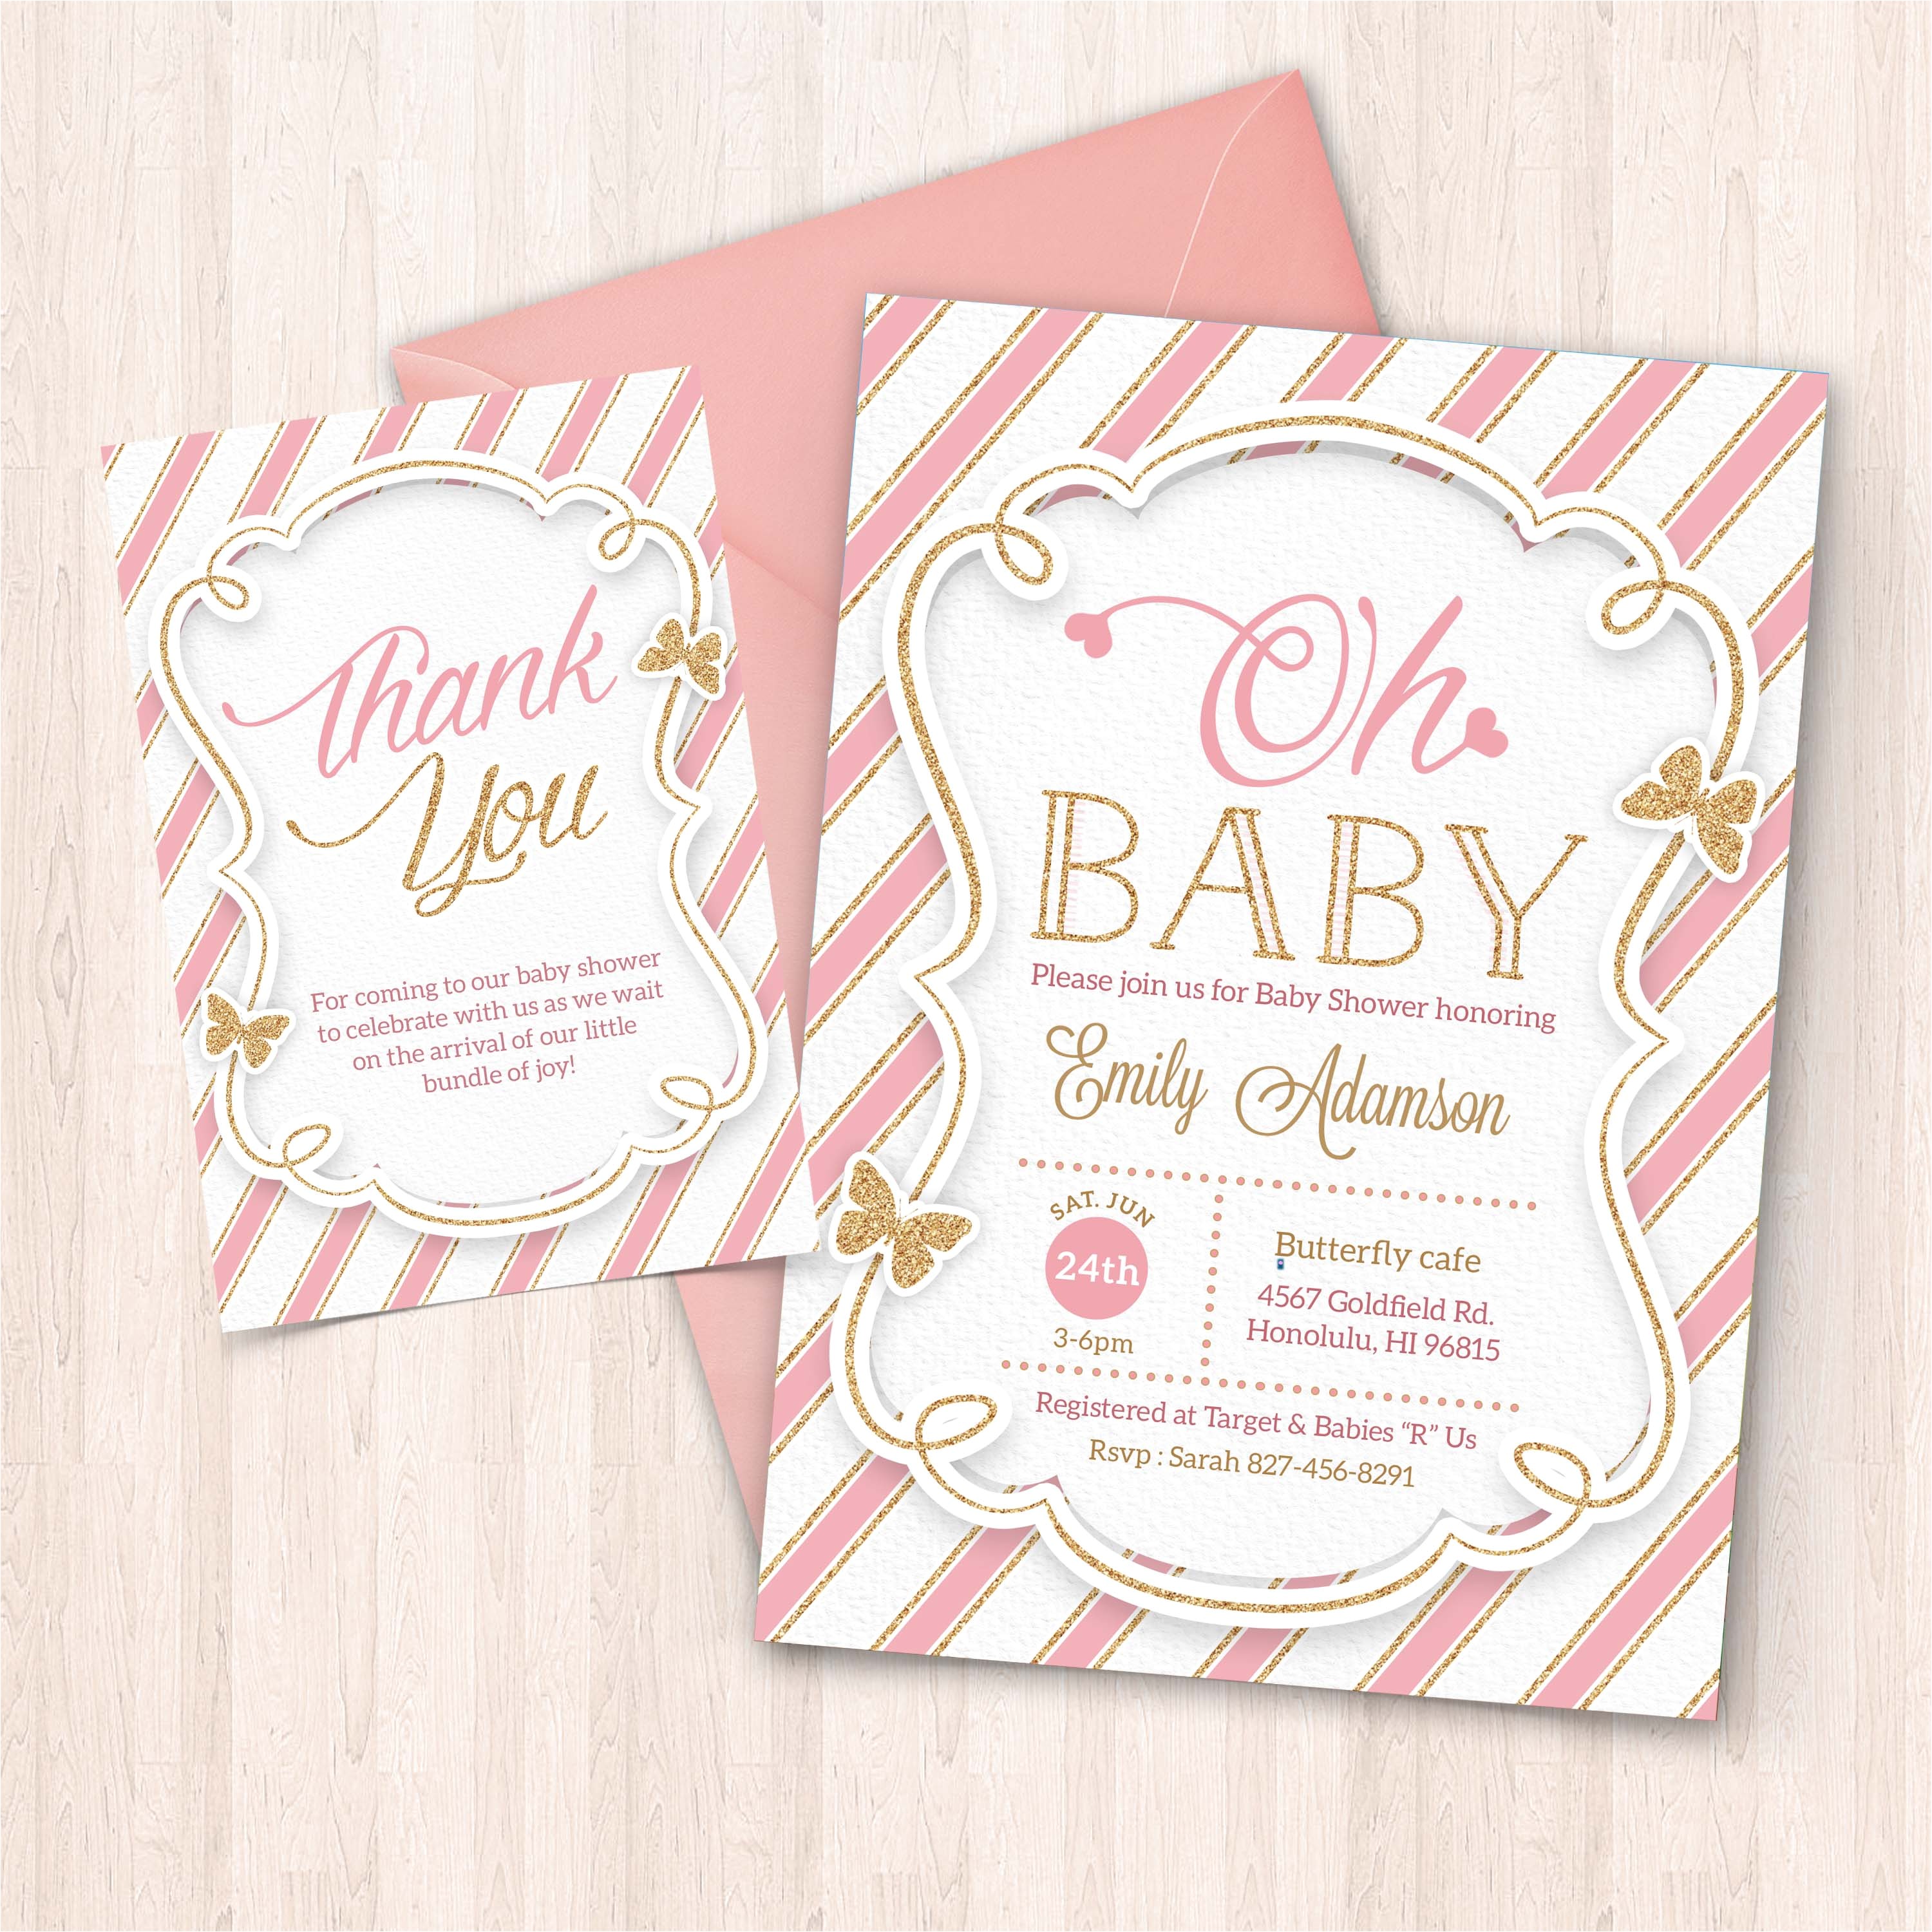 printable pink and gold baby shower invitation free thank you card to print at home